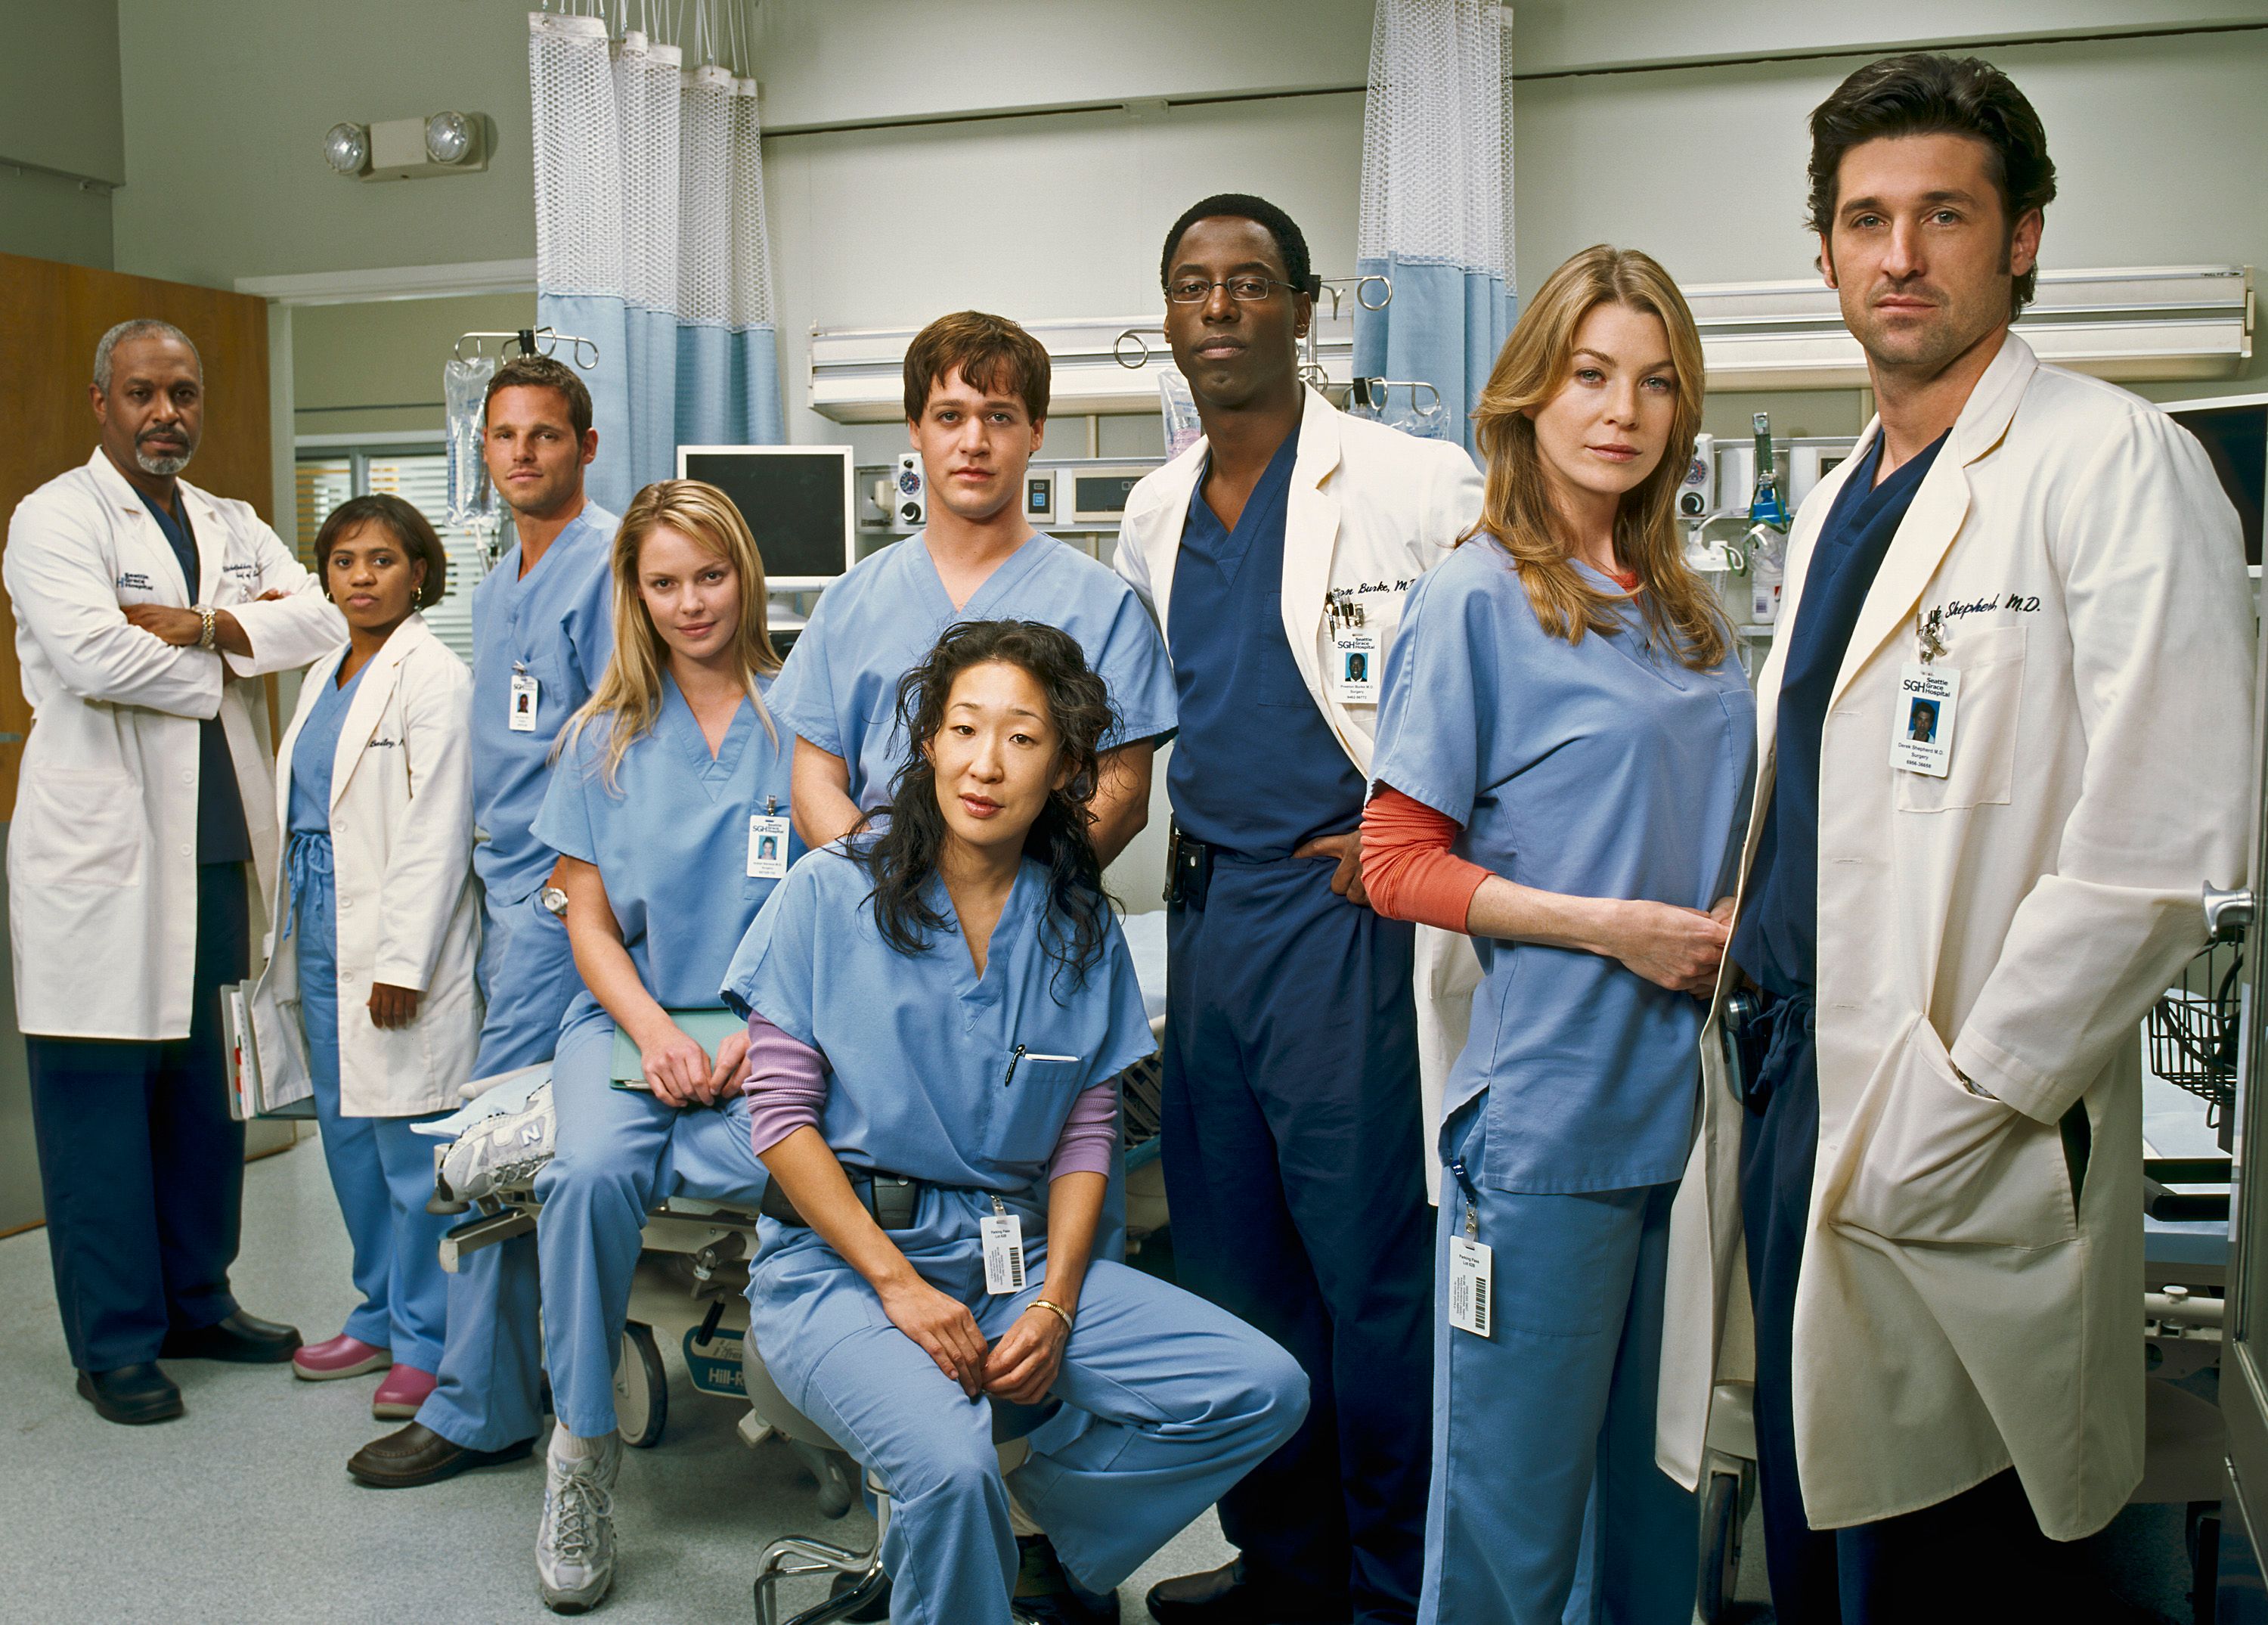 A portrait of the cast of ABC's "Grey's Anatomy" on January 23, 2005 | Photo: Getty Images